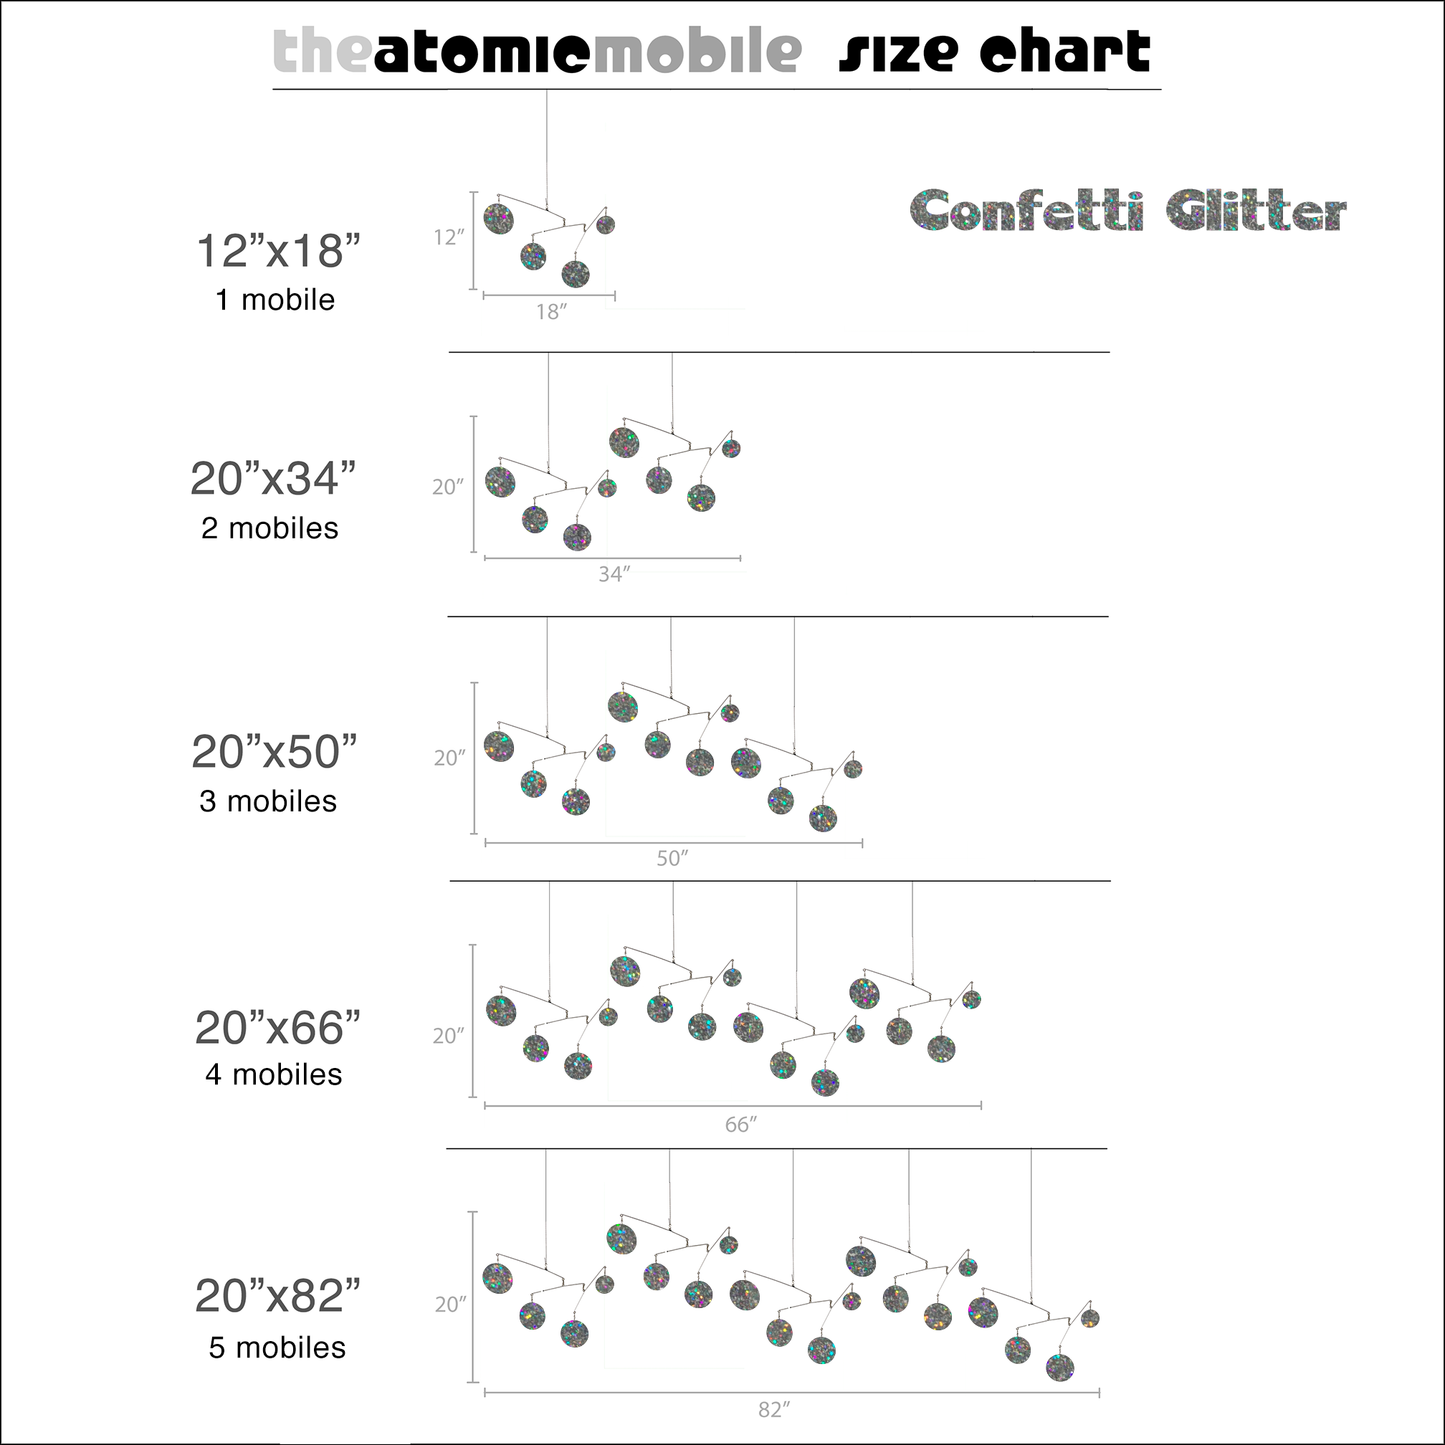 Confetti Glitter Size Chart for Atomic Mobiles - kinetic hanging art mobiles by AtomicMobiles.com